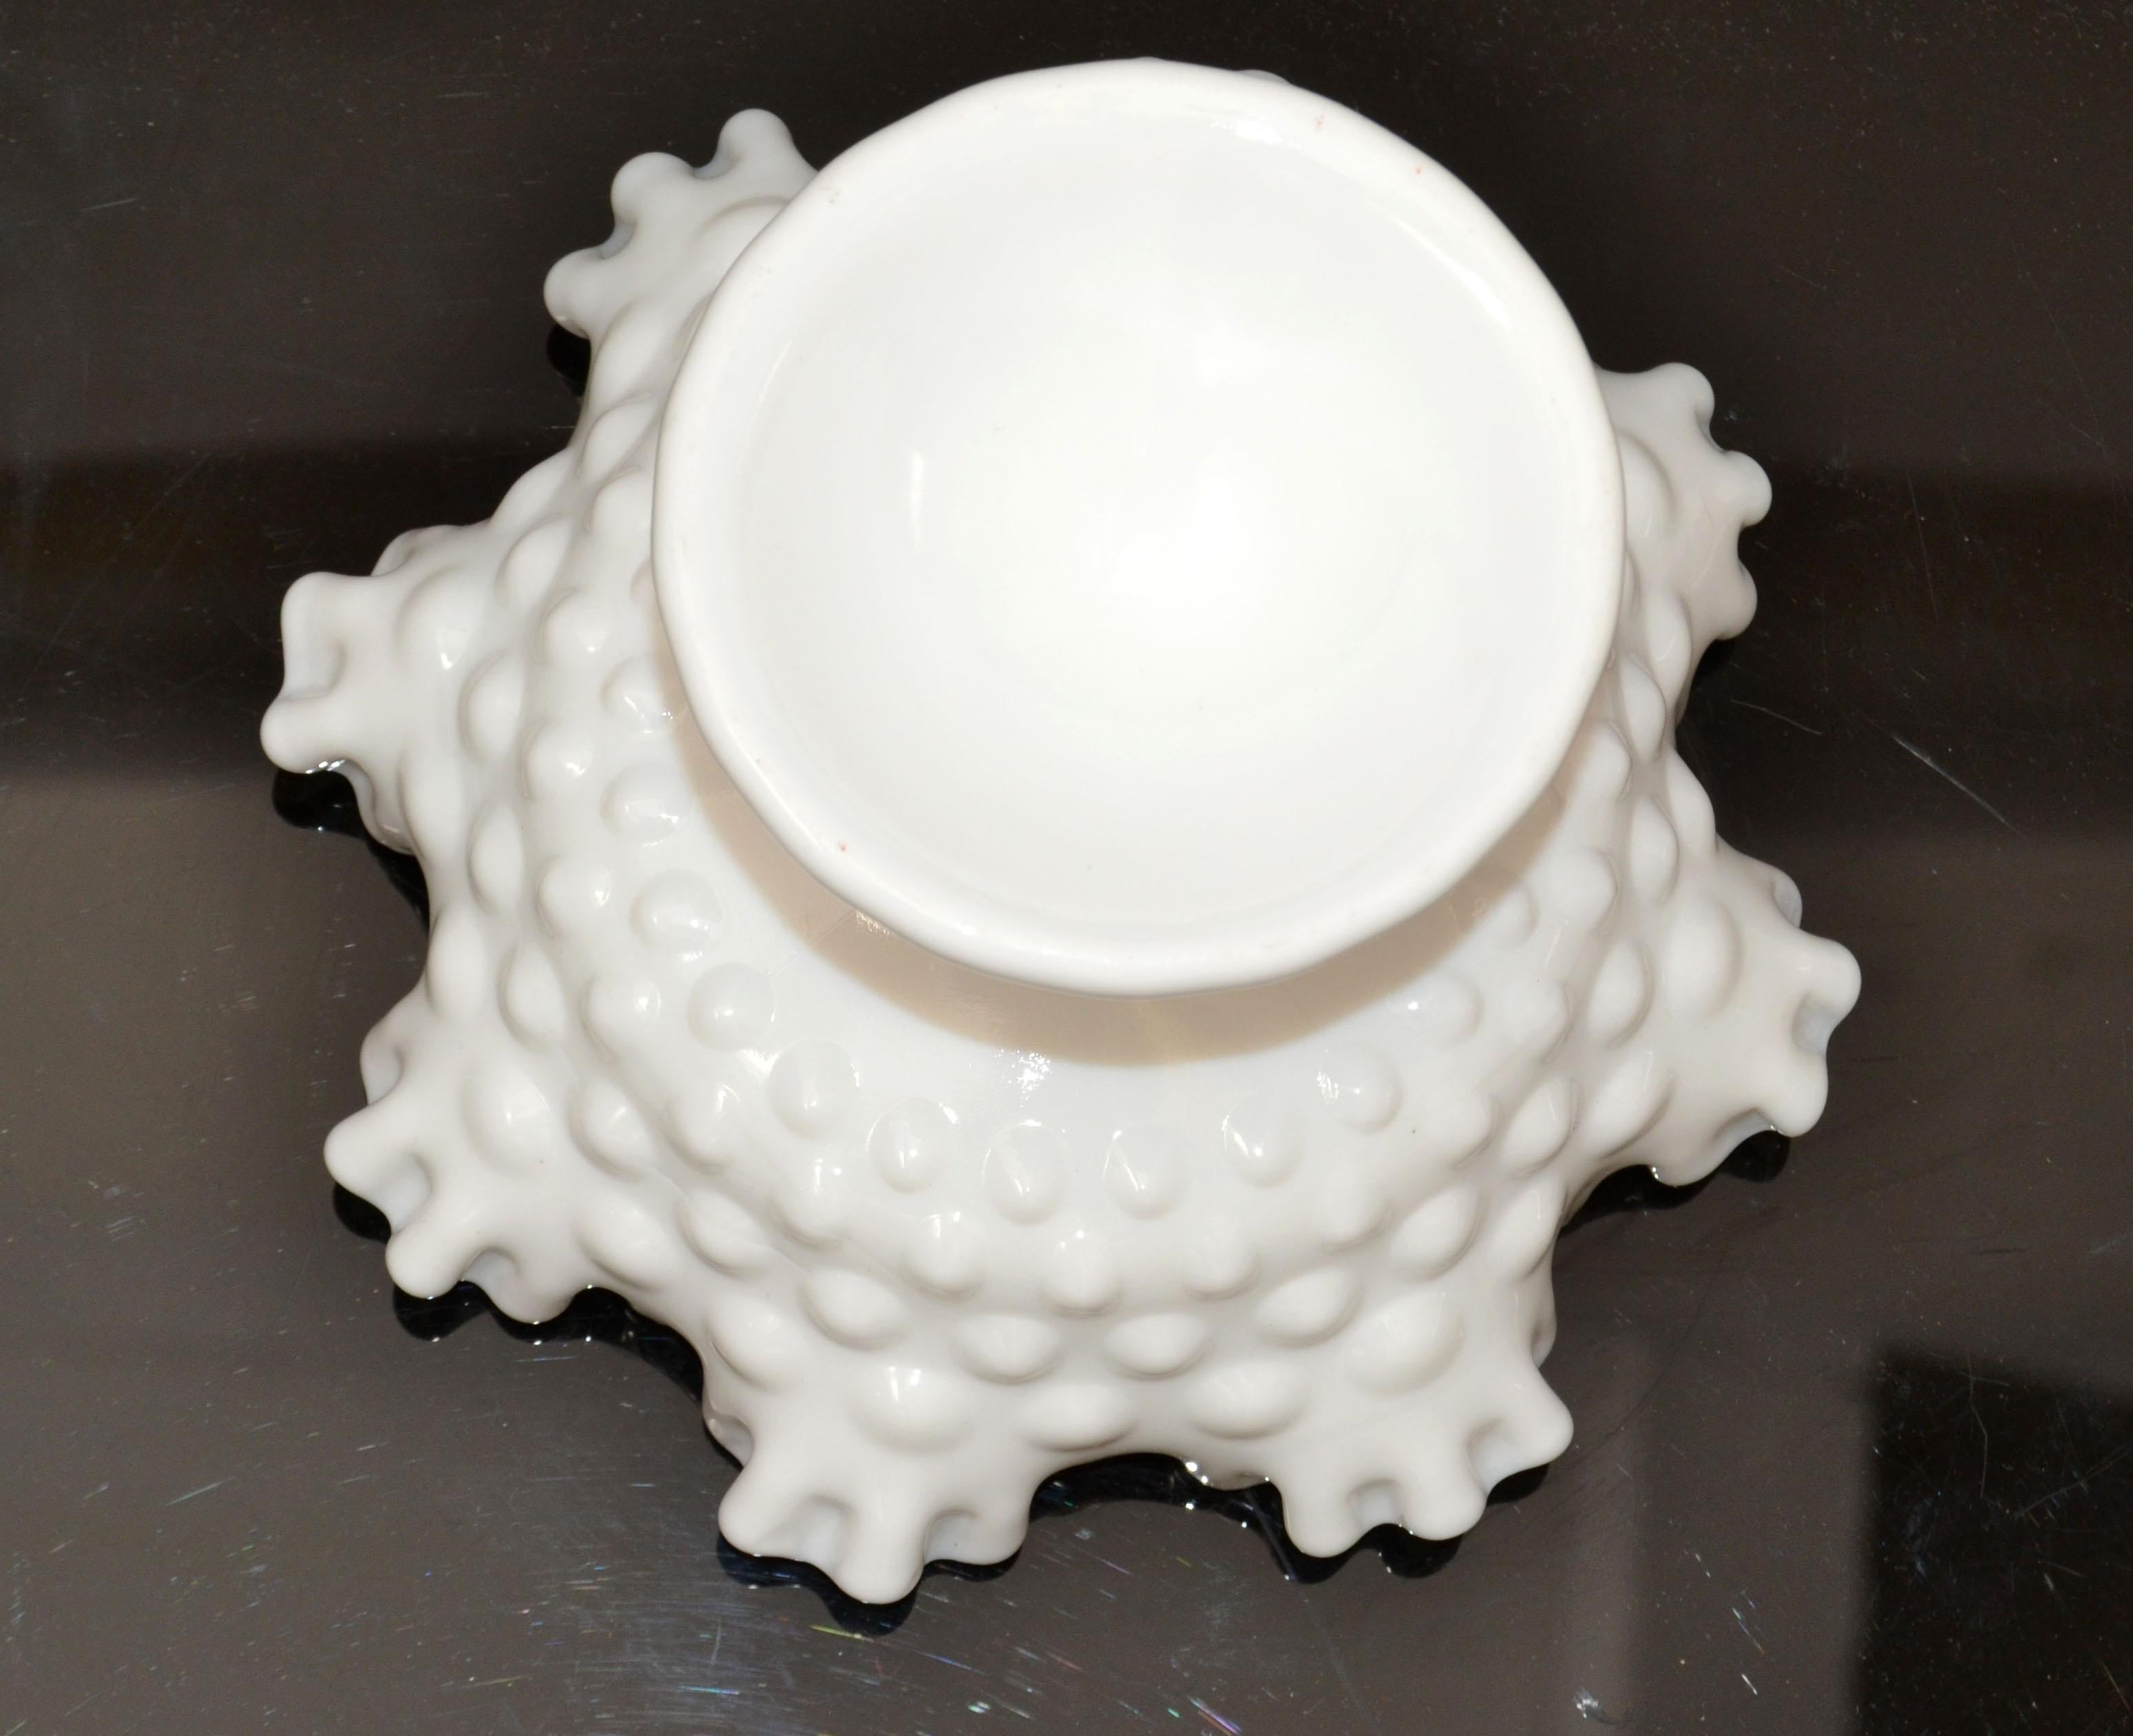 Fenton Hobnail White Ruffled Milk Glass Footed Bowl Candy Cream Serving Bowl 70s In Good Condition For Sale In Miami, FL